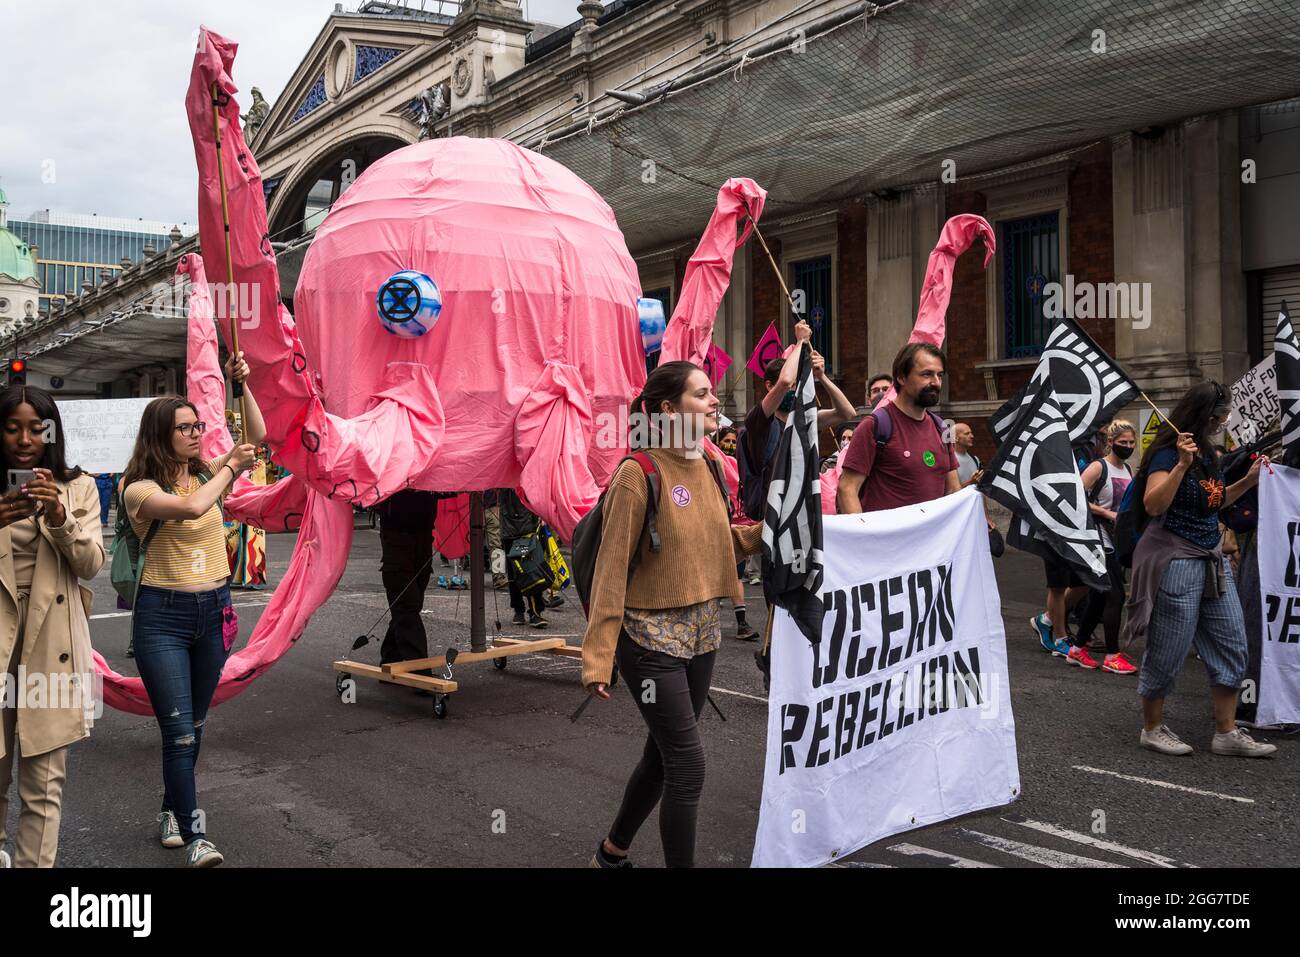 Ocean Rebellion, National Animal Rights March, organised by Animal Rebellion and  Extinction Rebellion in the City of London, England, UK. Several thousand people joined the group that campaigns to transition our food system to plant-based system in order to tackle the climate emergency.  August 28 2021 Stock Photo